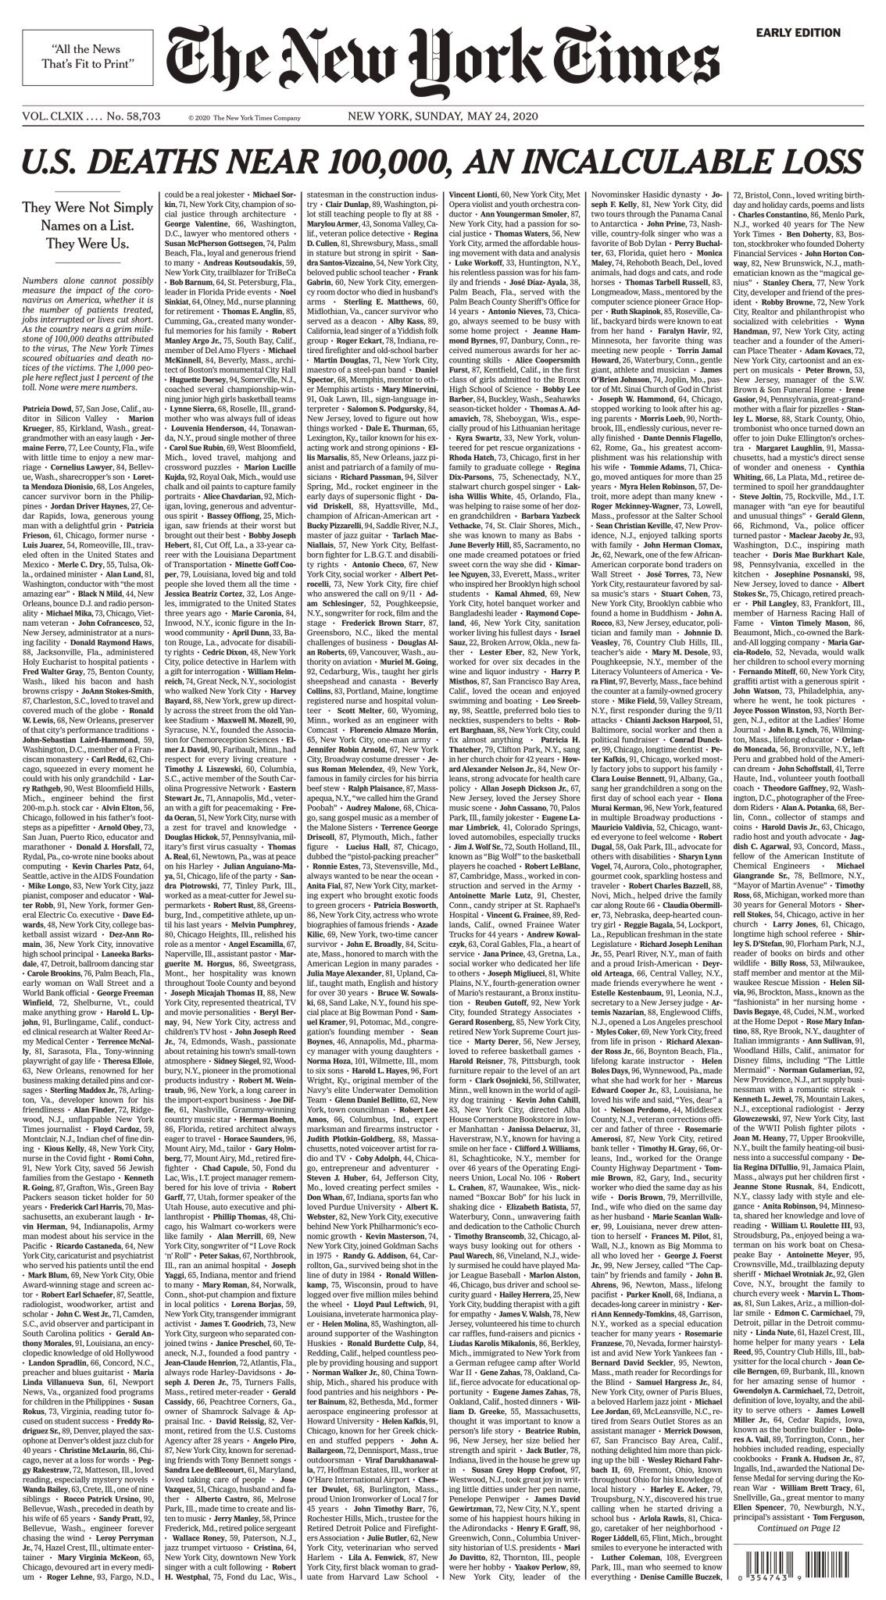 NY Times List of people who lost their lives due to the coronavirus